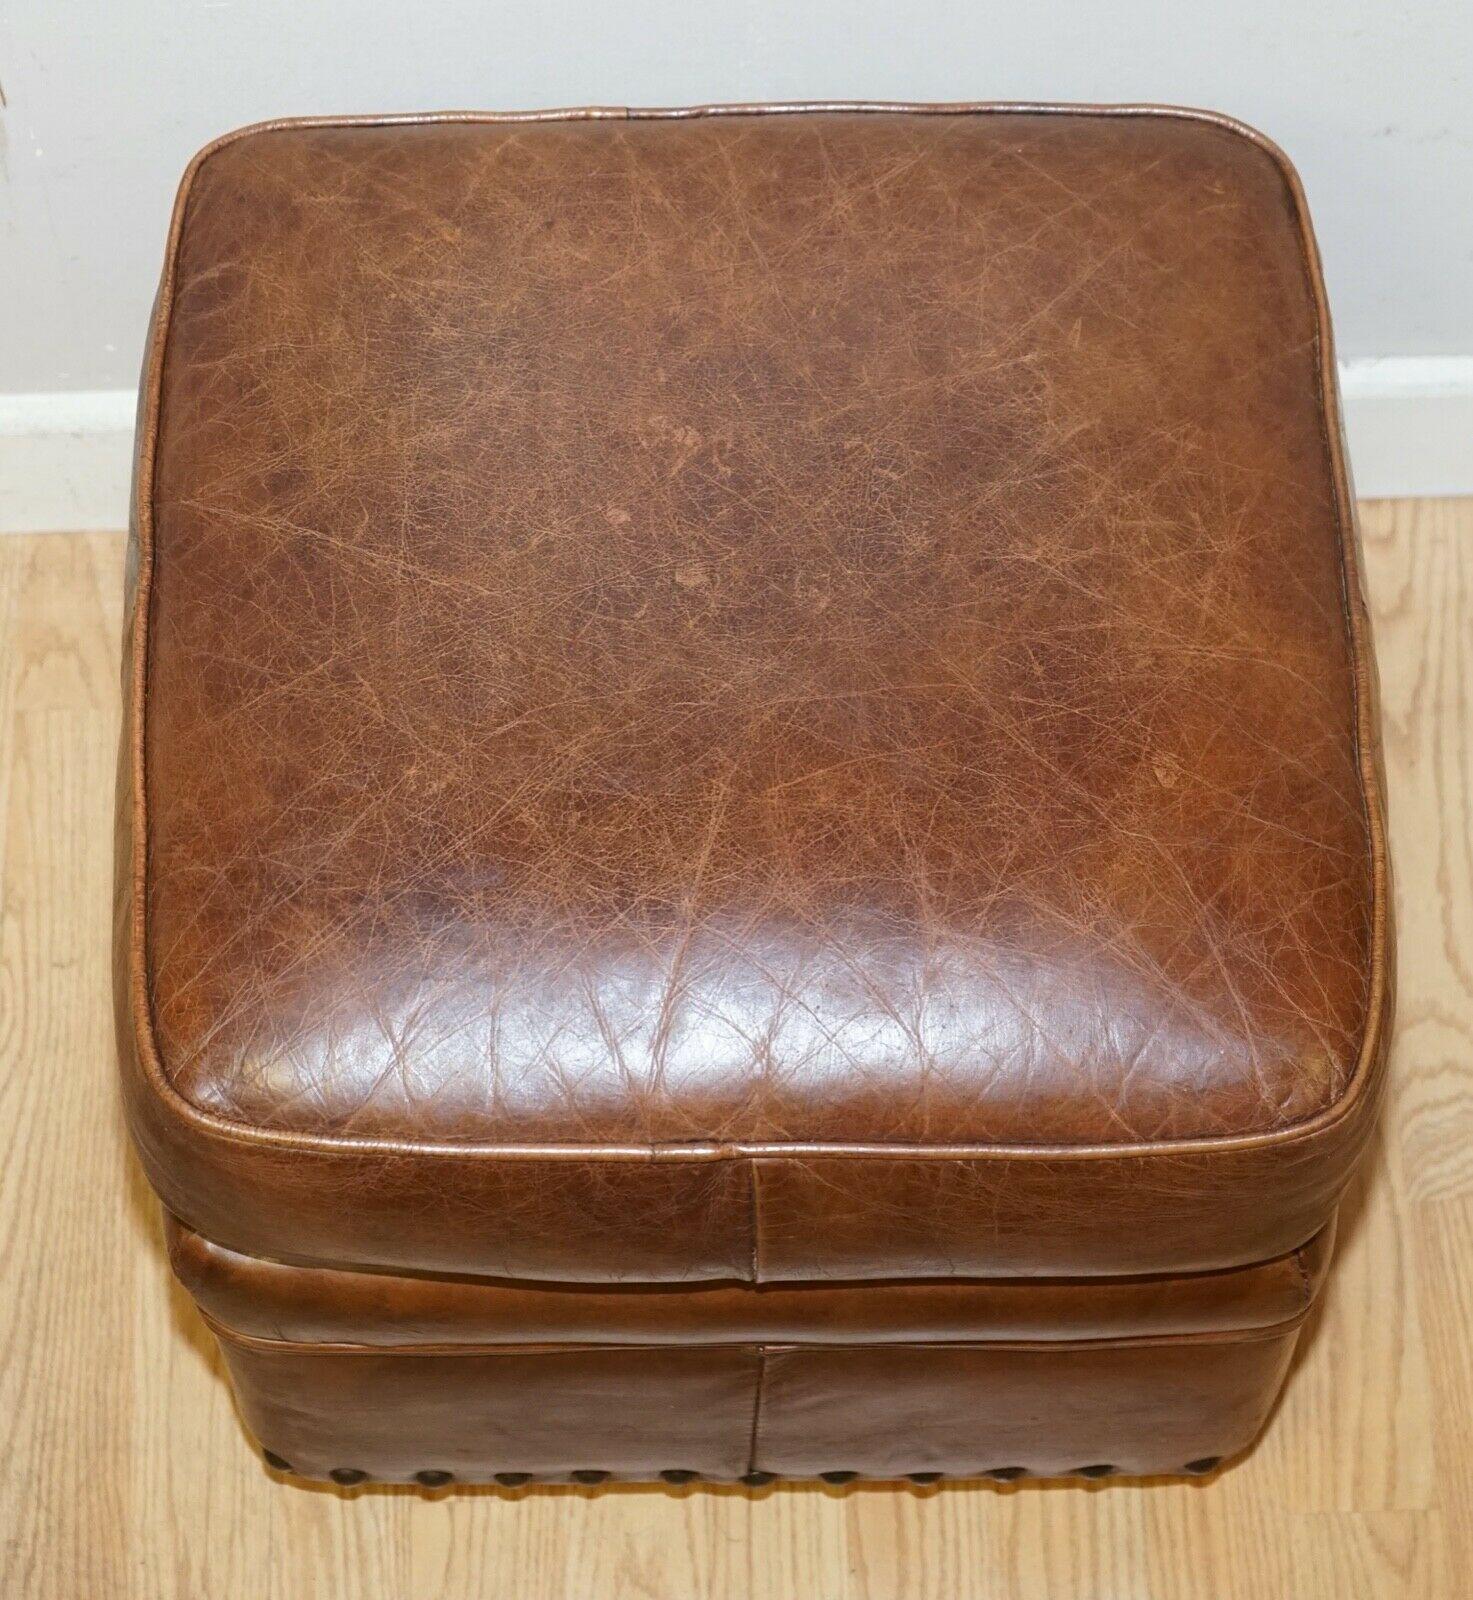 British Artsome Coach House Vintage Brown Leather Footstool with Studs